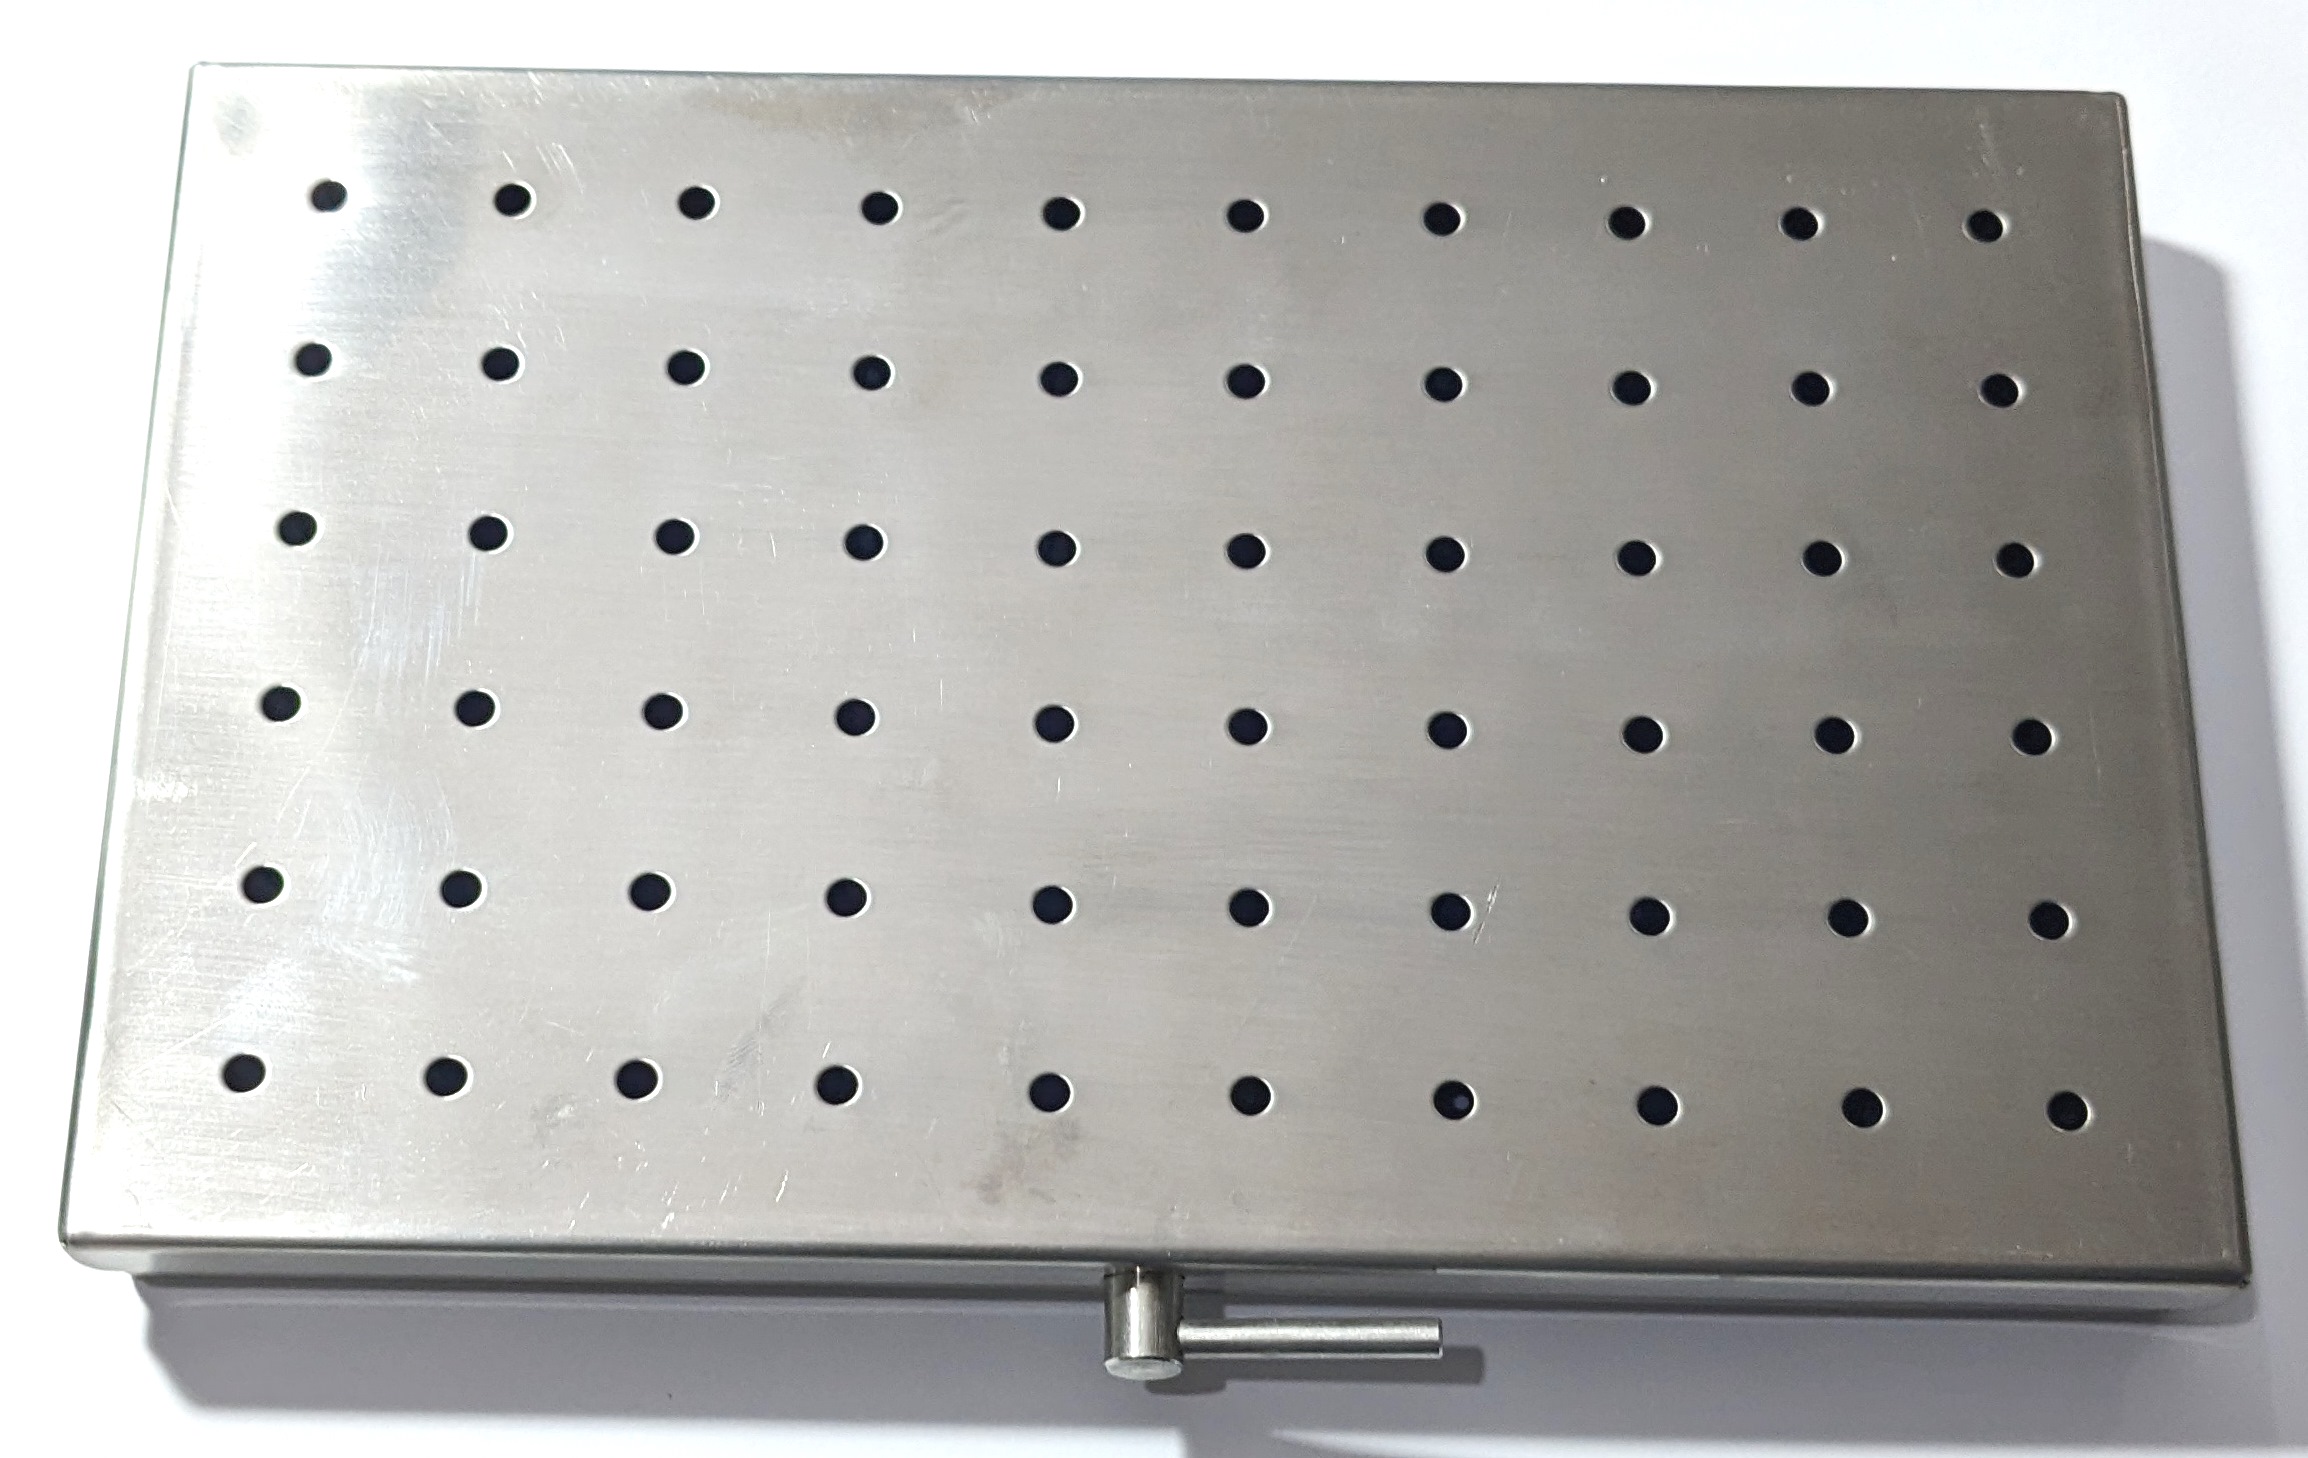 Stainless steel autoclave box 221mm x136mm x 20mm